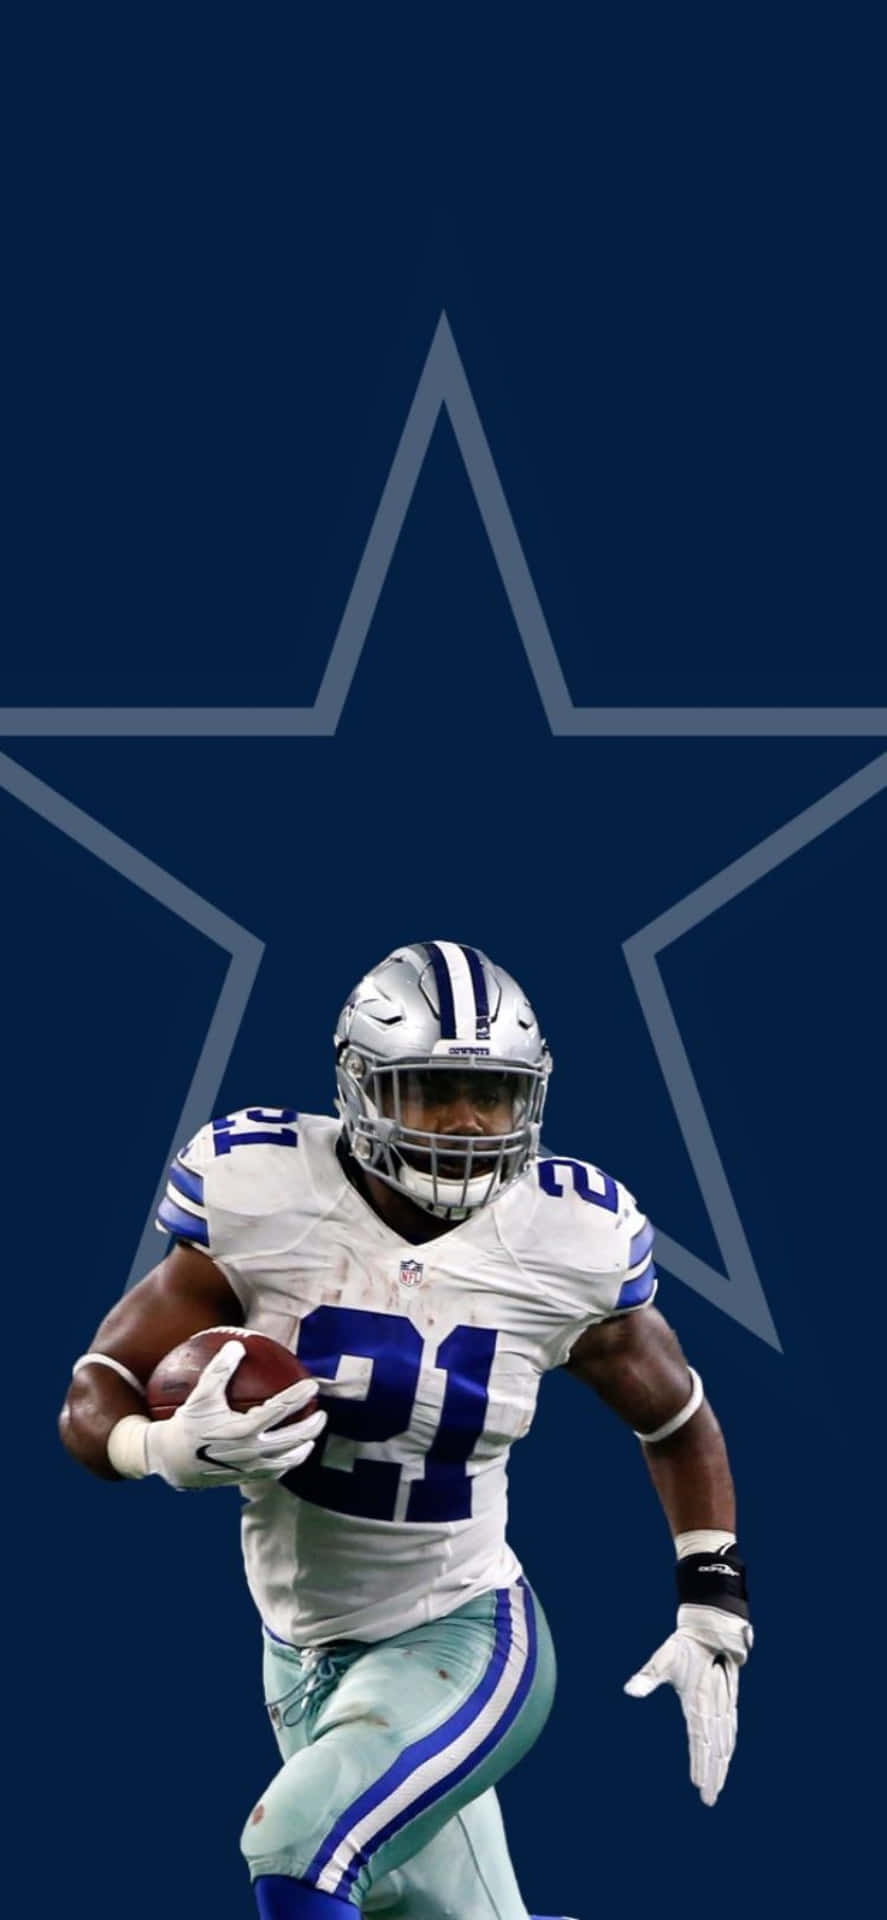 Unforgettable Memories With a Cowboys iPhone Wallpaper